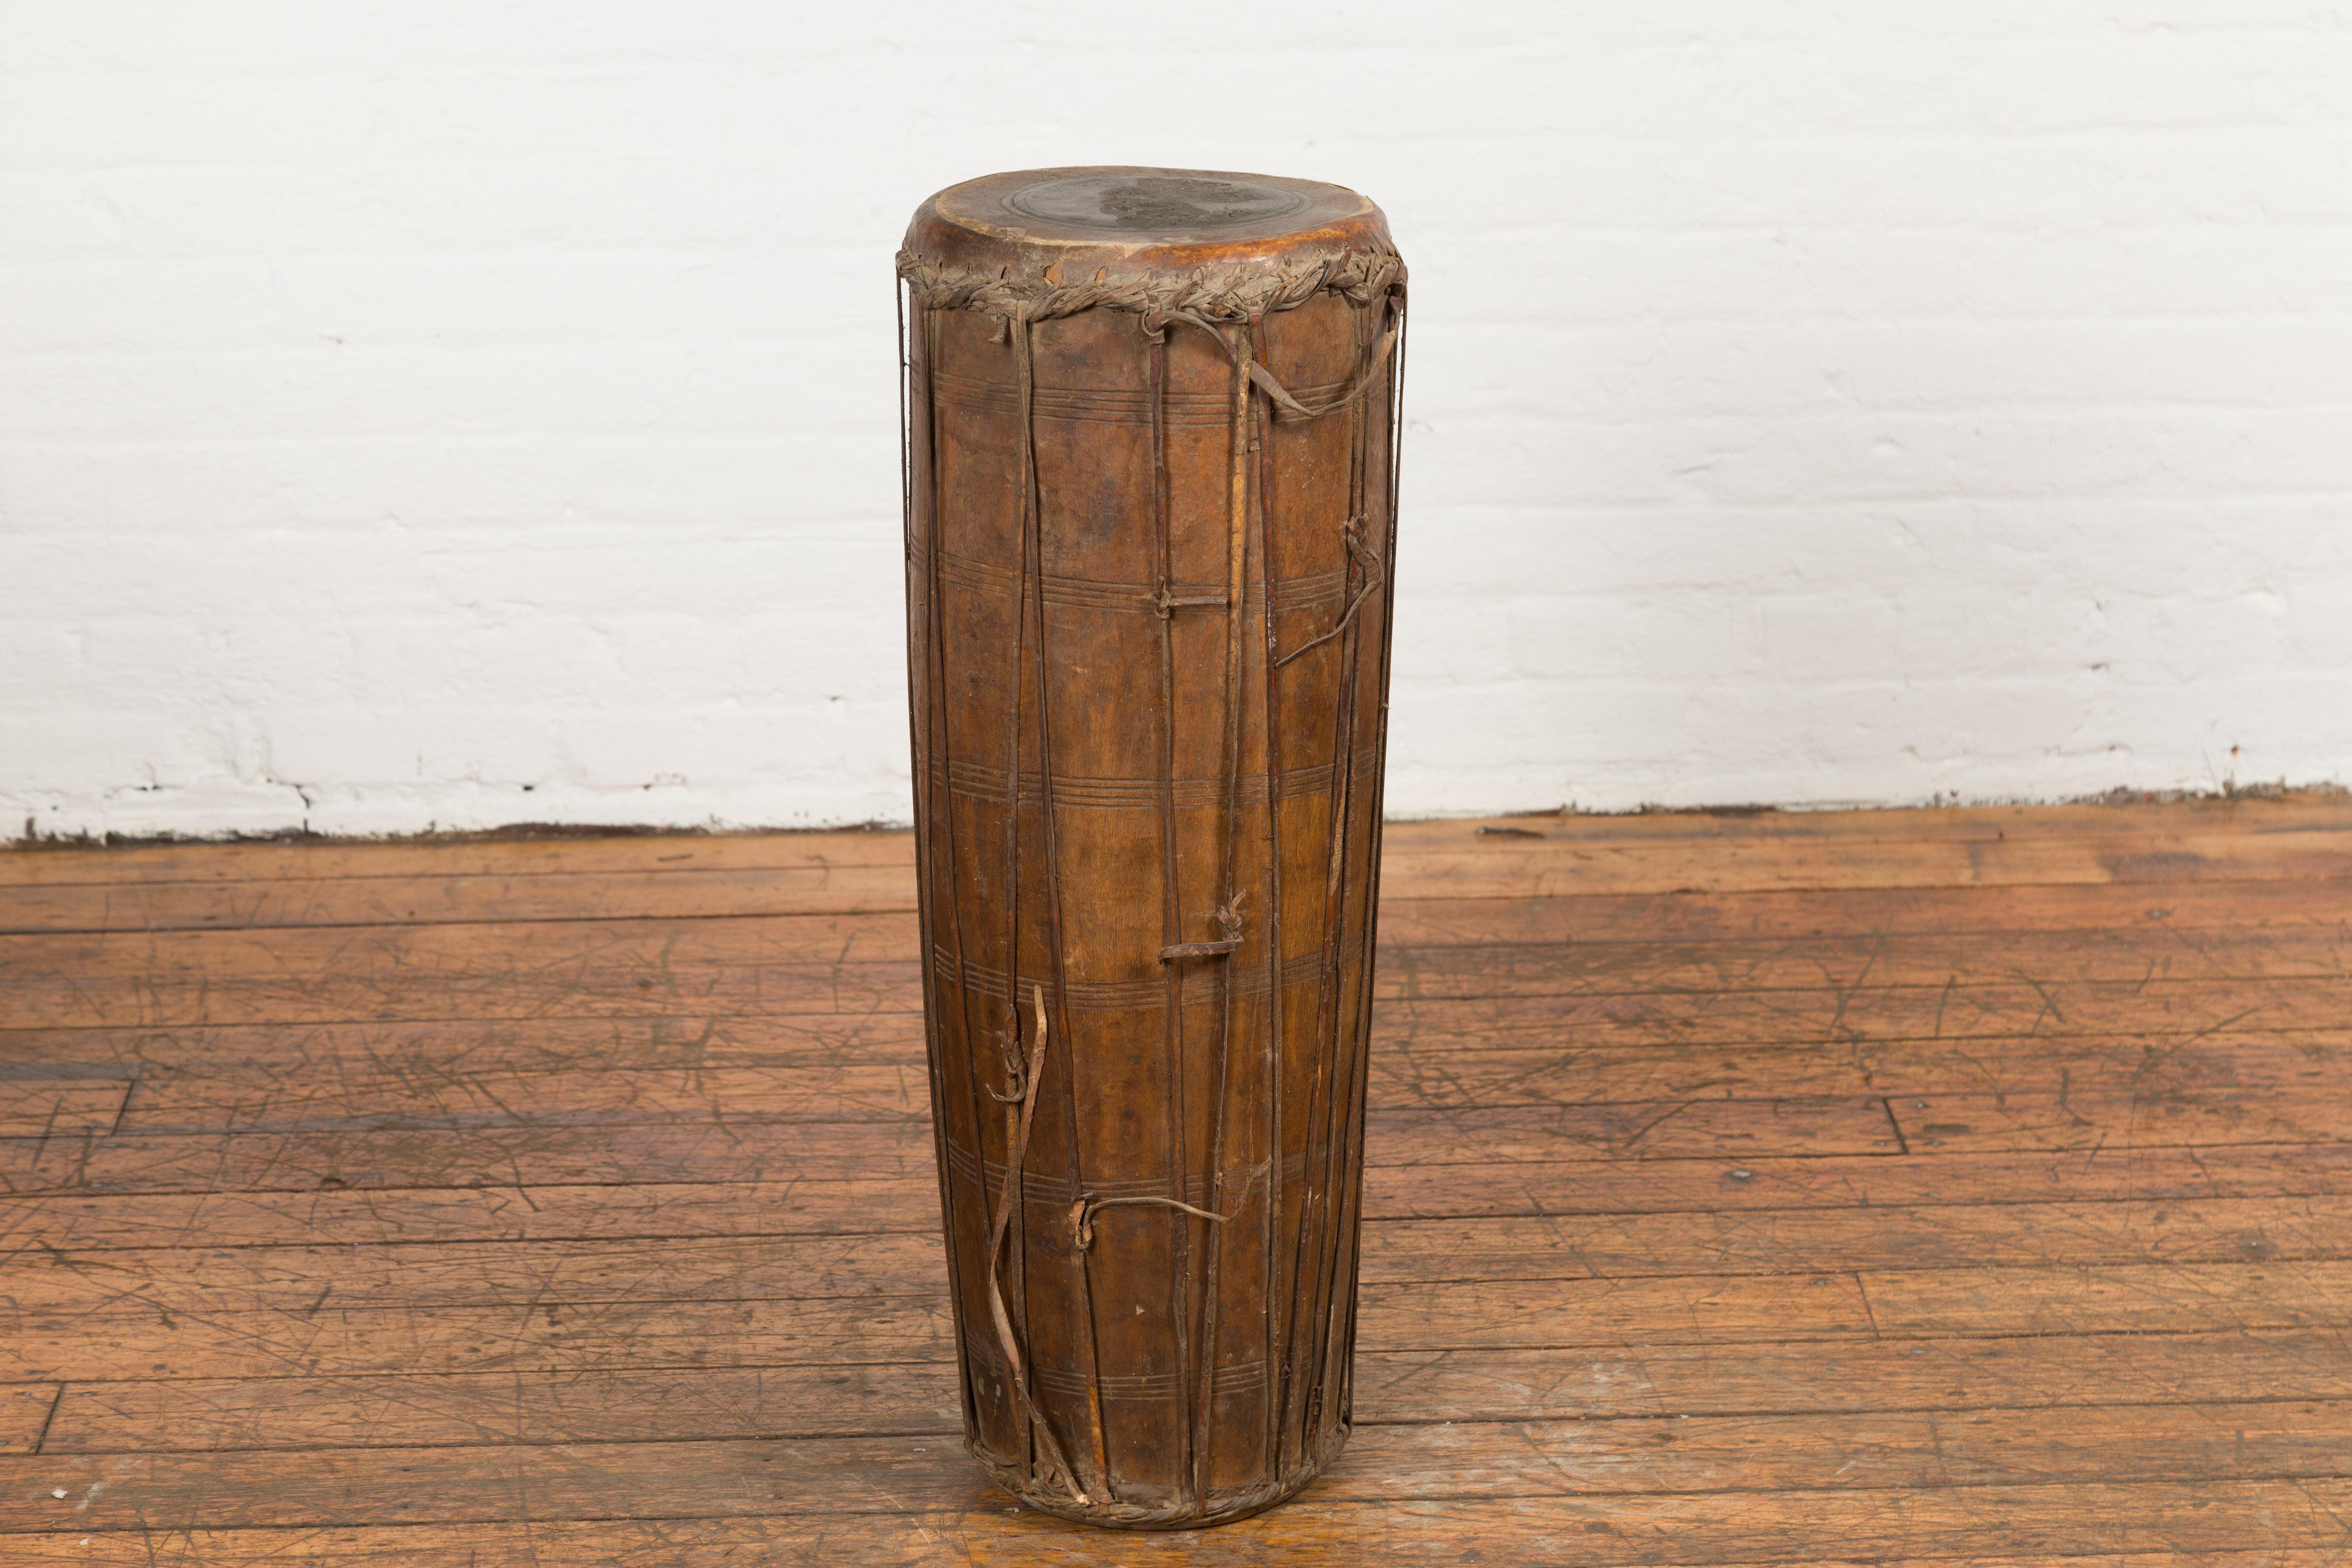 An antique Thai wood and leather Klong Khaek processional drum from the 19th Century, with ties and weathered patina. Created in Thailand during the 19th century, this Klong Khaek drum was likely used in Thai ensembles for processions. The